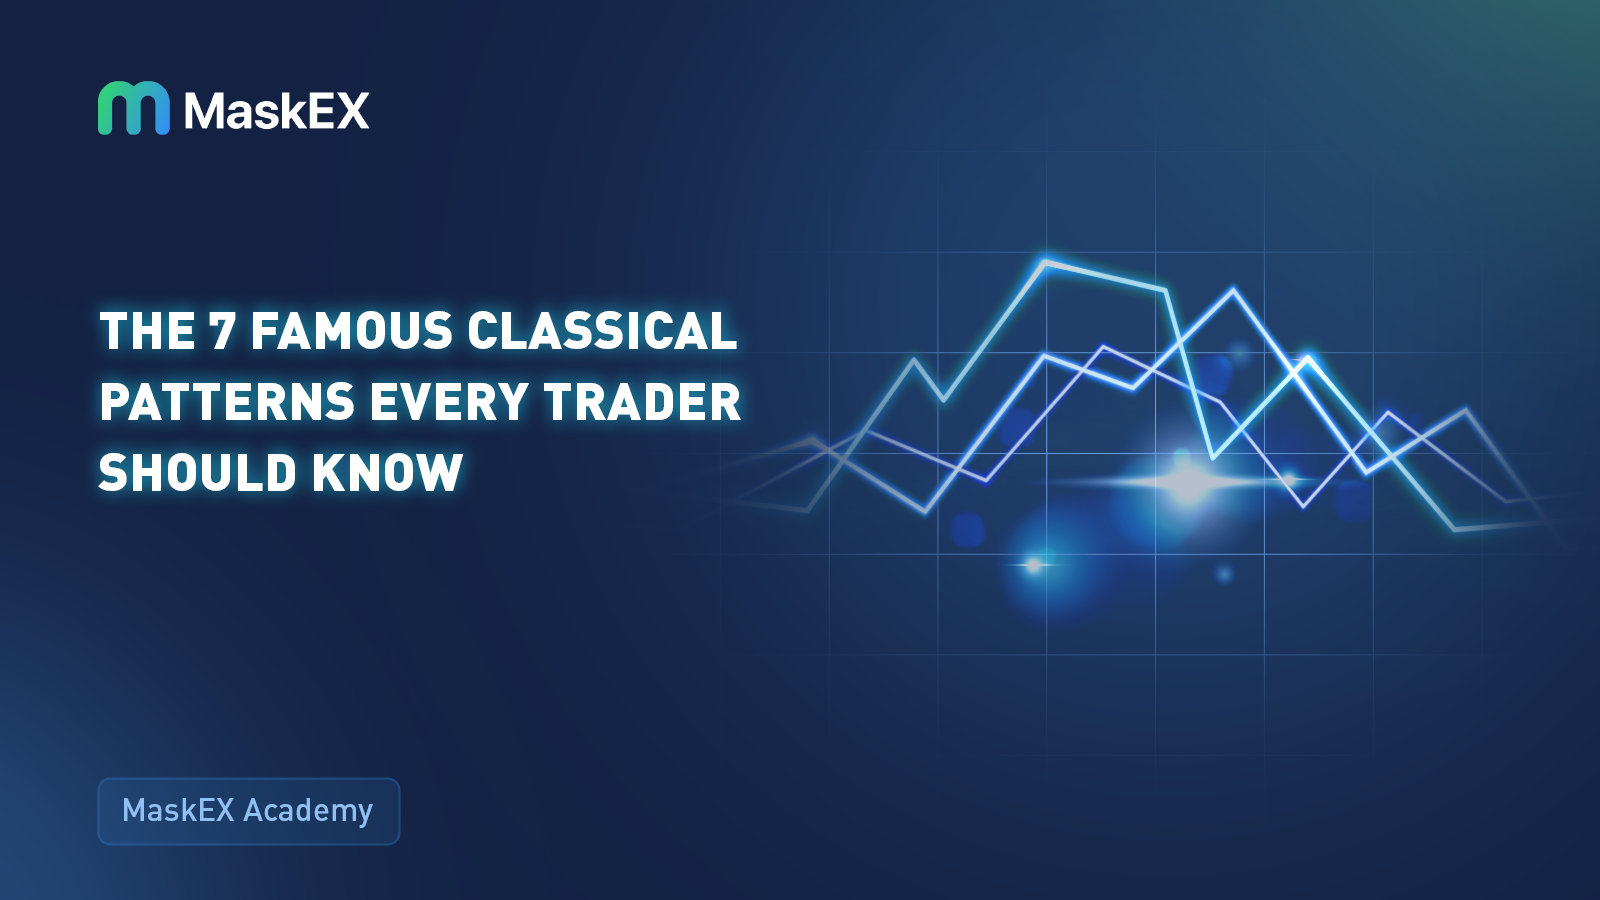 The 7 Famous Classical Patterns Every Trader Should Know